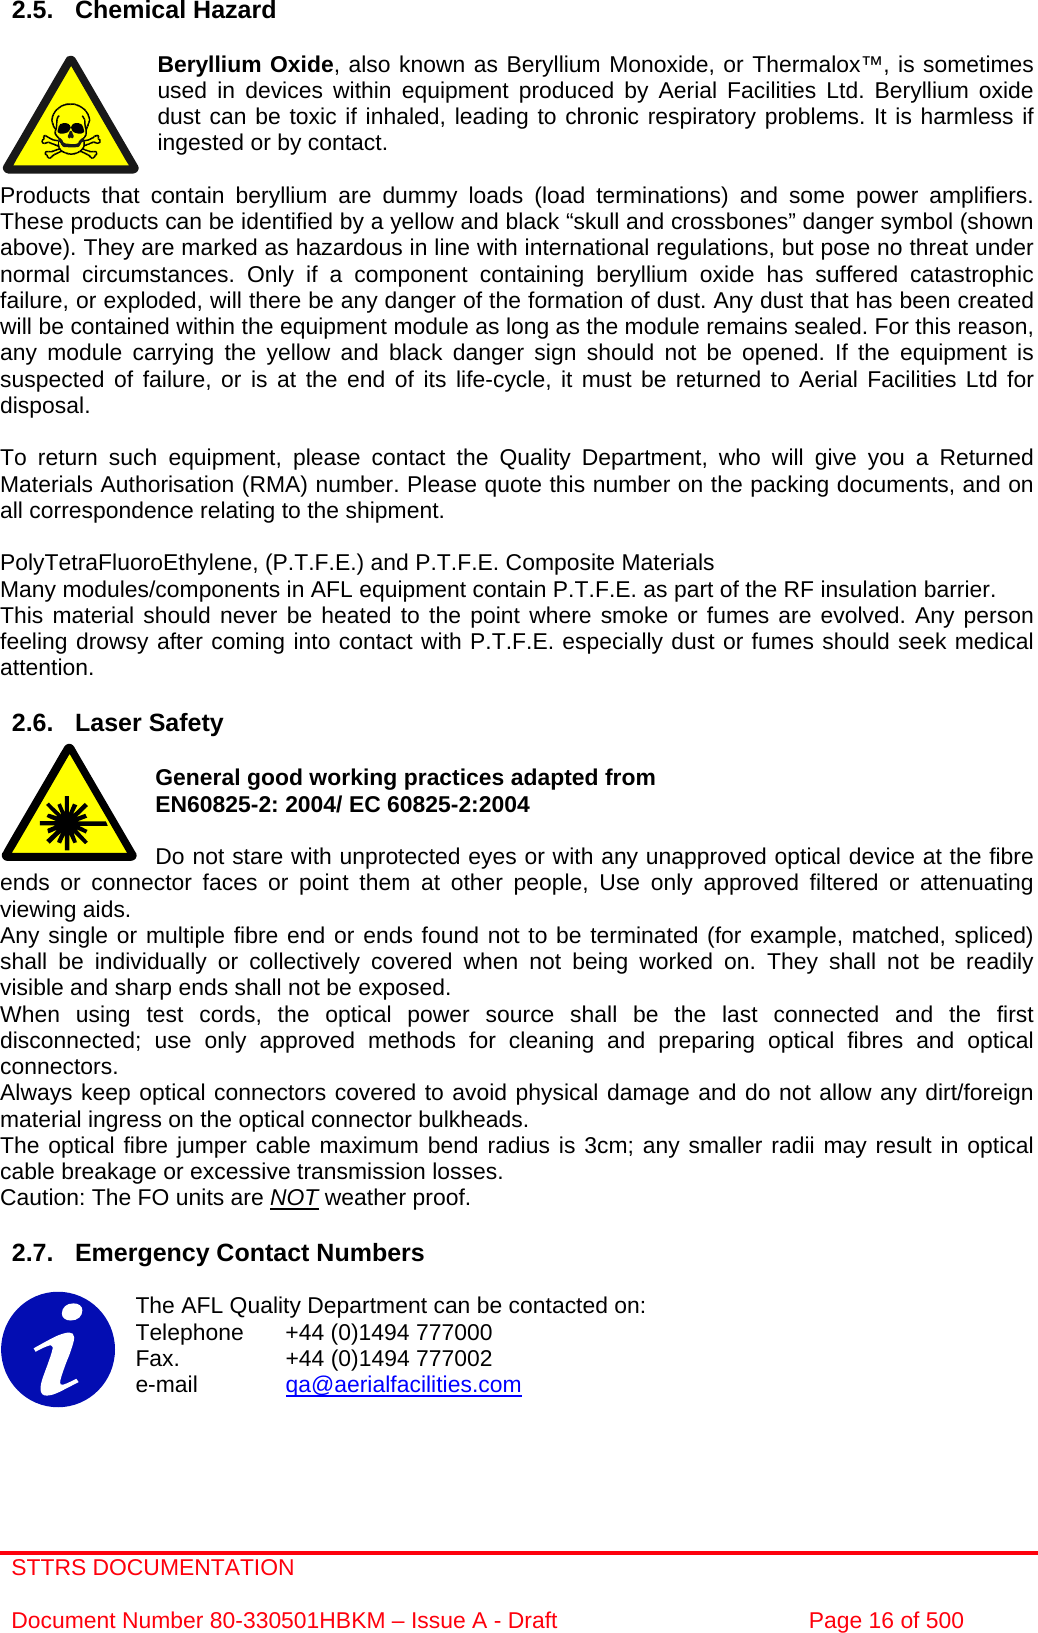 STTRS DOCUMENTATION  Document Number 80-330501HBKM – Issue A - Draft  Page 16 of 500   2.5. Chemical Hazard  Beryllium Oxide, also known as Beryllium Monoxide, or Thermalox™, is sometimes used in devices within equipment produced by Aerial Facilities Ltd. Beryllium oxide dust can be toxic if inhaled, leading to chronic respiratory problems. It is harmless if ingested or by contact.  Products that contain beryllium are dummy loads (load terminations) and some power amplifiers. These products can be identified by a yellow and black “skull and crossbones” danger symbol (shown above). They are marked as hazardous in line with international regulations, but pose no threat under normal circumstances. Only if a component containing beryllium oxide has suffered catastrophic failure, or exploded, will there be any danger of the formation of dust. Any dust that has been created will be contained within the equipment module as long as the module remains sealed. For this reason, any module carrying the yellow and black danger sign should not be opened. If the equipment is suspected of failure, or is at the end of its life-cycle, it must be returned to Aerial Facilities Ltd for disposal.  To return such equipment, please contact the Quality Department, who will give you a Returned Materials Authorisation (RMA) number. Please quote this number on the packing documents, and on all correspondence relating to the shipment.  PolyTetraFluoroEthylene, (P.T.F.E.) and P.T.F.E. Composite Materials Many modules/components in AFL equipment contain P.T.F.E. as part of the RF insulation barrier. This material should never be heated to the point where smoke or fumes are evolved. Any person feeling drowsy after coming into contact with P.T.F.E. especially dust or fumes should seek medical attention.  2.6. Laser Safety  General good working practices adapted from EN60825-2: 2004/ EC 60825-2:2004  Do not stare with unprotected eyes or with any unapproved optical device at the fibre ends or connector faces or point them at other people, Use only approved filtered or attenuating viewing aids. Any single or multiple fibre end or ends found not to be terminated (for example, matched, spliced) shall be individually or collectively covered when not being worked on. They shall not be readily visible and sharp ends shall not be exposed. When using test cords, the optical power source shall be the last connected and the first disconnected; use only approved methods for cleaning and preparing optical fibres and optical connectors. Always keep optical connectors covered to avoid physical damage and do not allow any dirt/foreign material ingress on the optical connector bulkheads. The optical fibre jumper cable maximum bend radius is 3cm; any smaller radii may result in optical cable breakage or excessive transmission losses. Caution: The FO units are NOT weather proof.  2.7.  Emergency Contact Numbers  The AFL Quality Department can be contacted on: Telephone   +44 (0)1494 777000 Fax.    +44 (0)1494 777002 e-mail   qa@aerialfacilities.com     